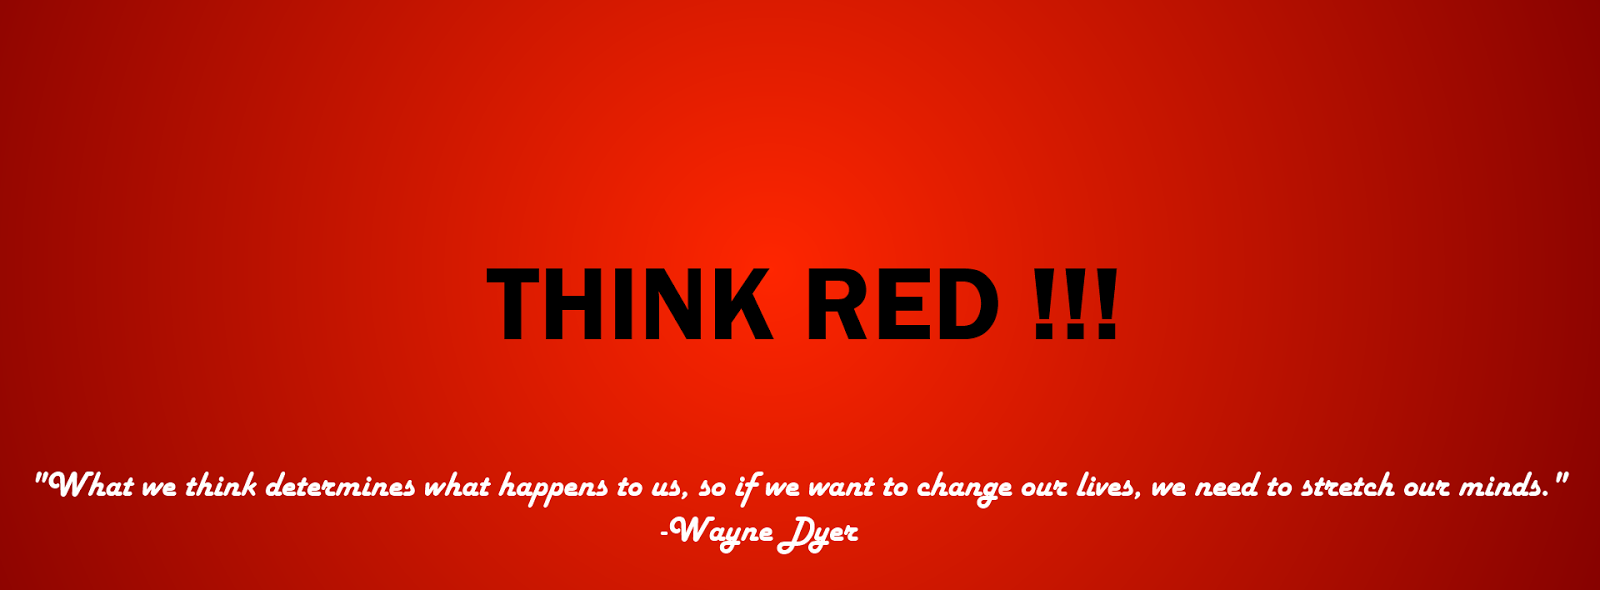 Think Red !!!